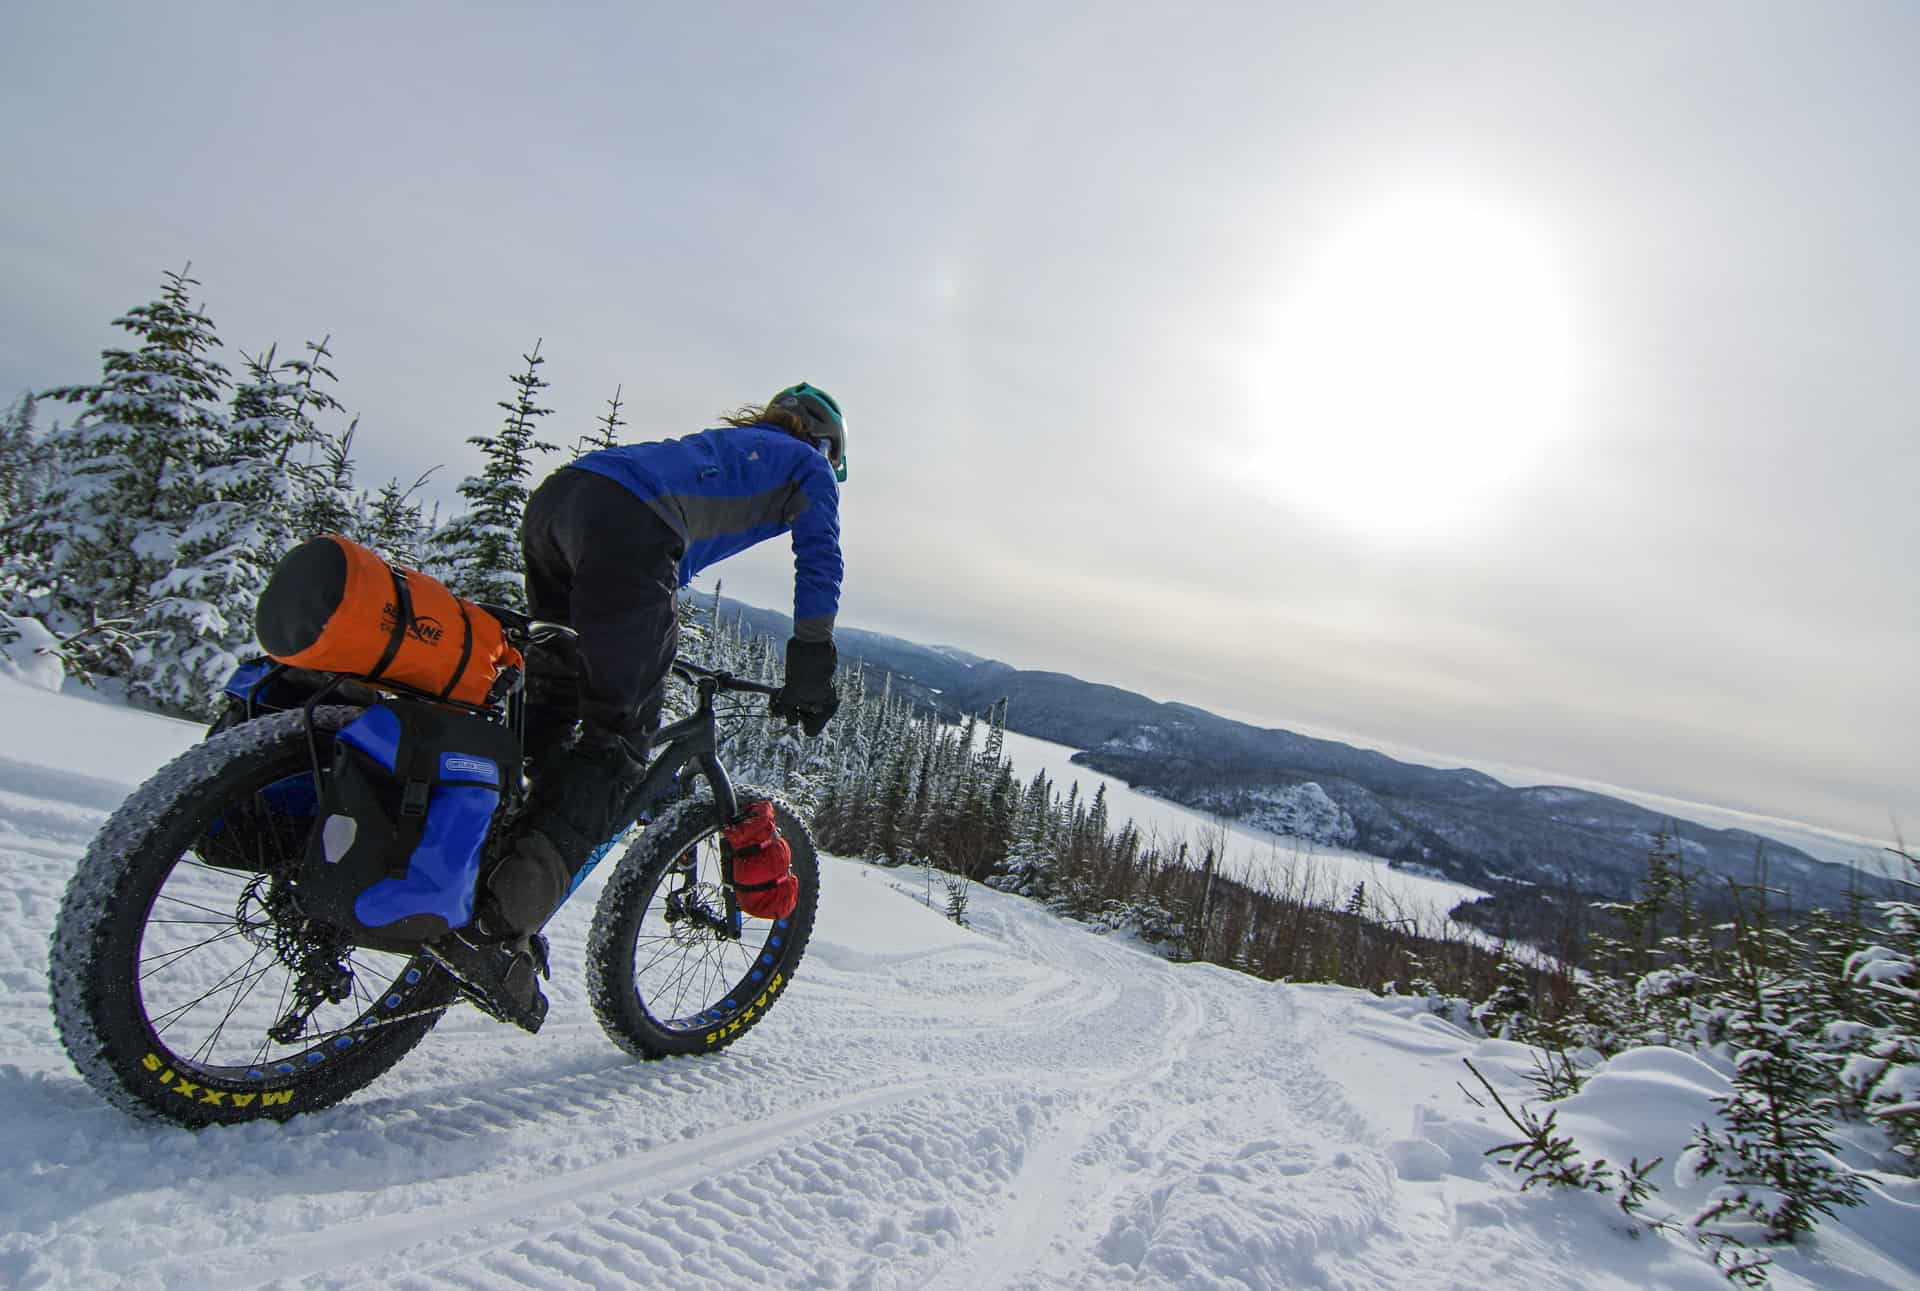 Fatbike Backcountry expedition in charlevoix